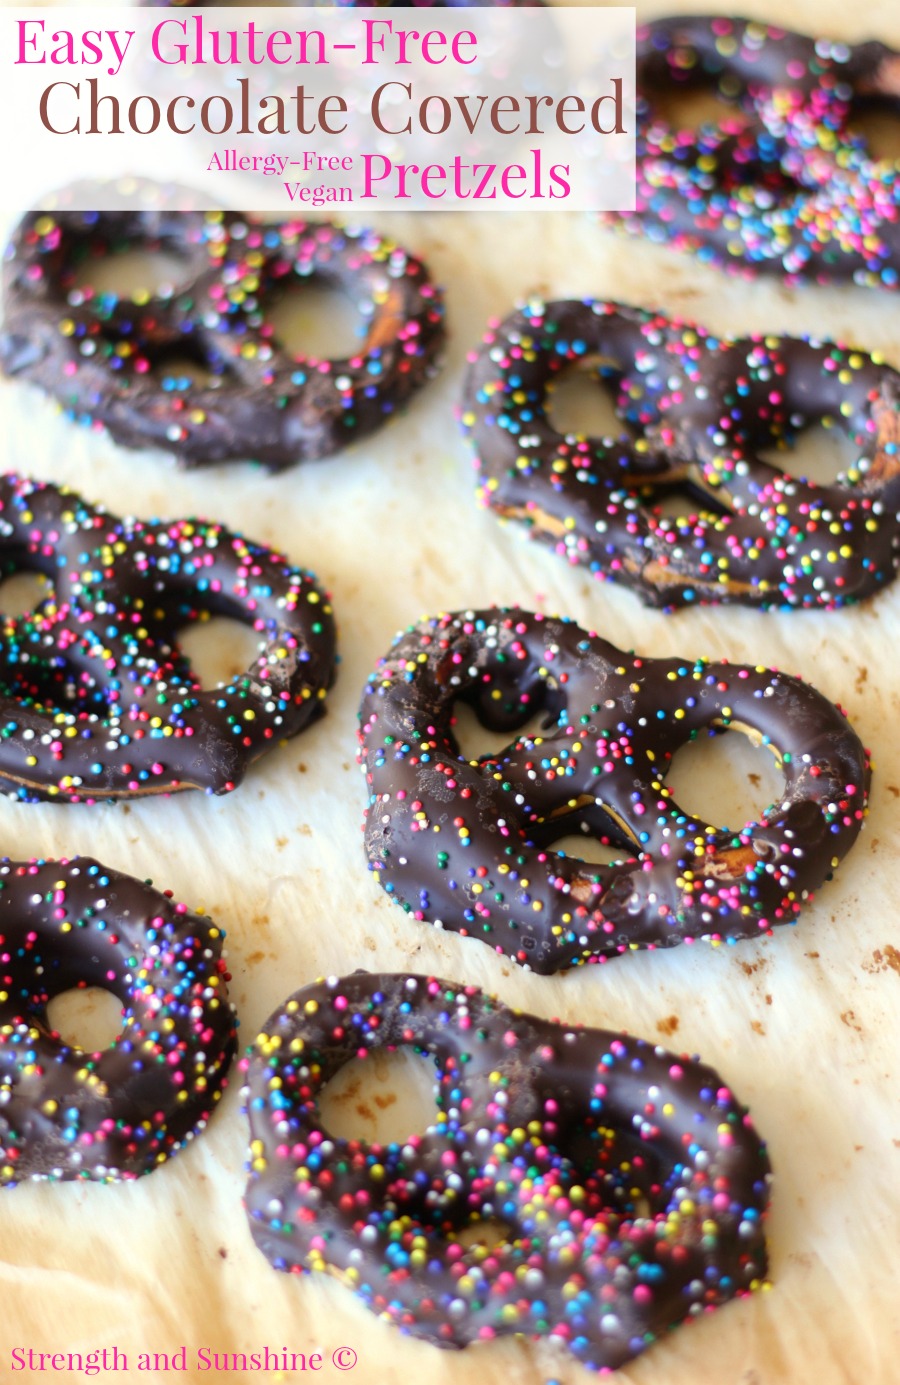 Easy Gluten-Free Chocolate Covered Pretzels (Allergy-Free, Vegan) | Strength and Sunshine @RebeccaGF666 The sweet and salty classic, now with a gluten-free, vegan, and allergy-free recipe! These Easy Gluten-Free Chocolate Covered Pretzels just need 2 ingredients and make for a fun dessert, snack, or edible gift!